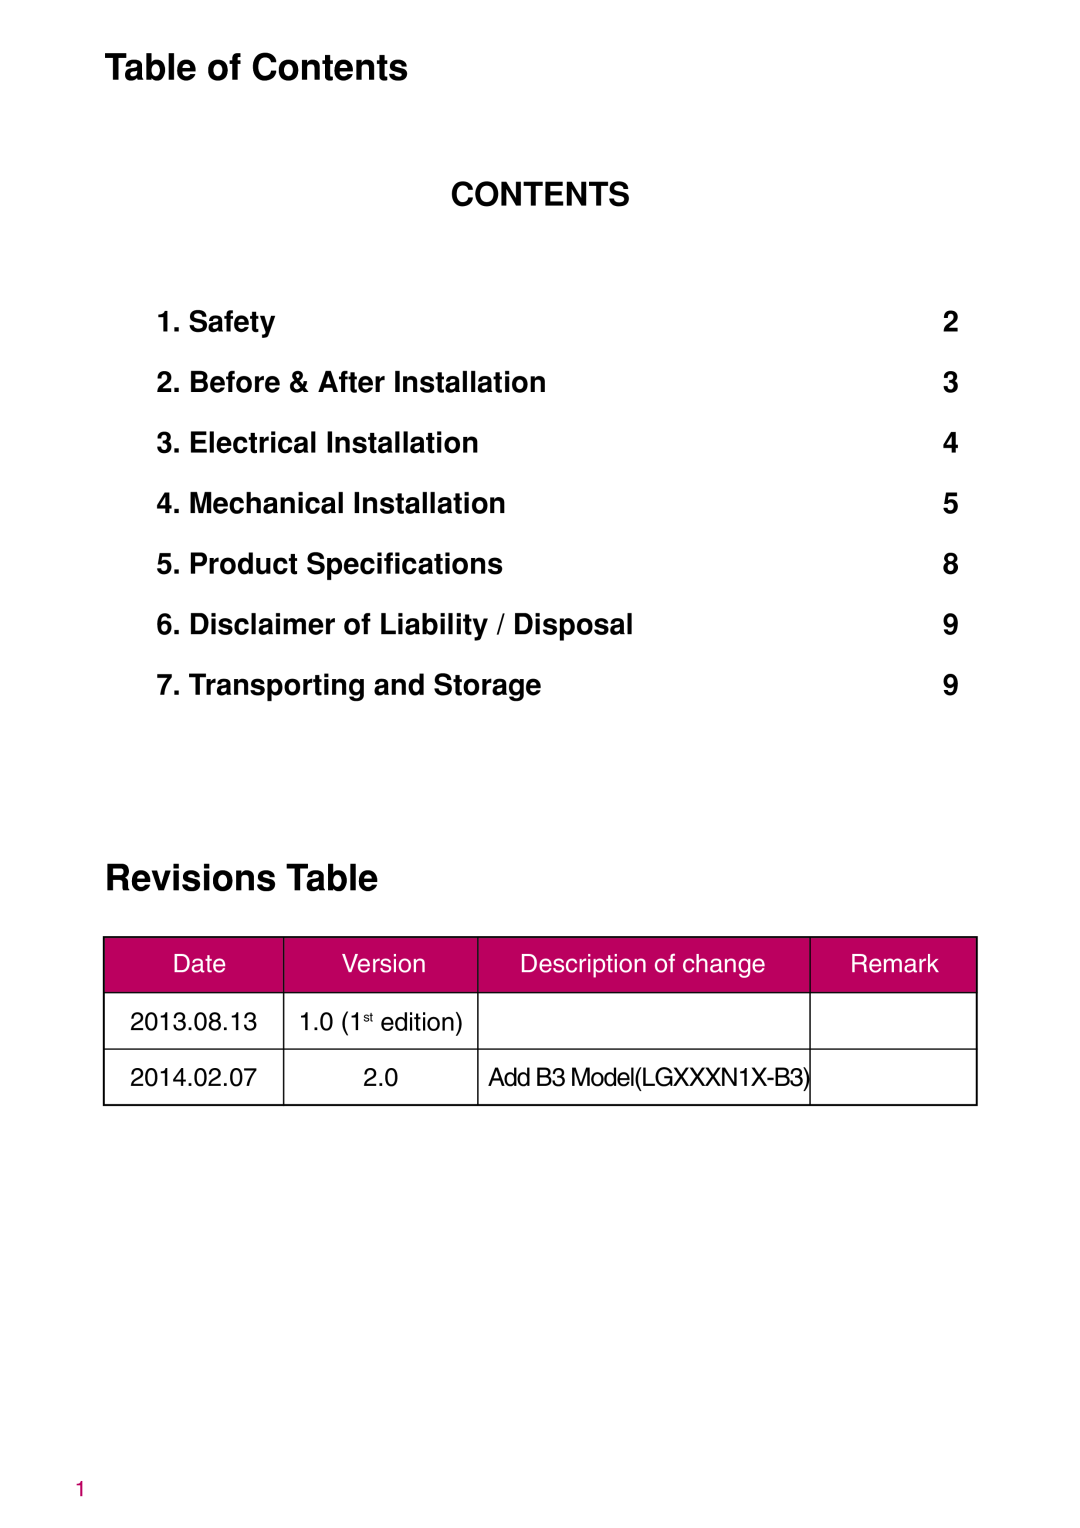 LG Electronics LGXXXN1C(W Table of Contents, Revisions Table, Safety, Before & After Installation, Electrical Installation 